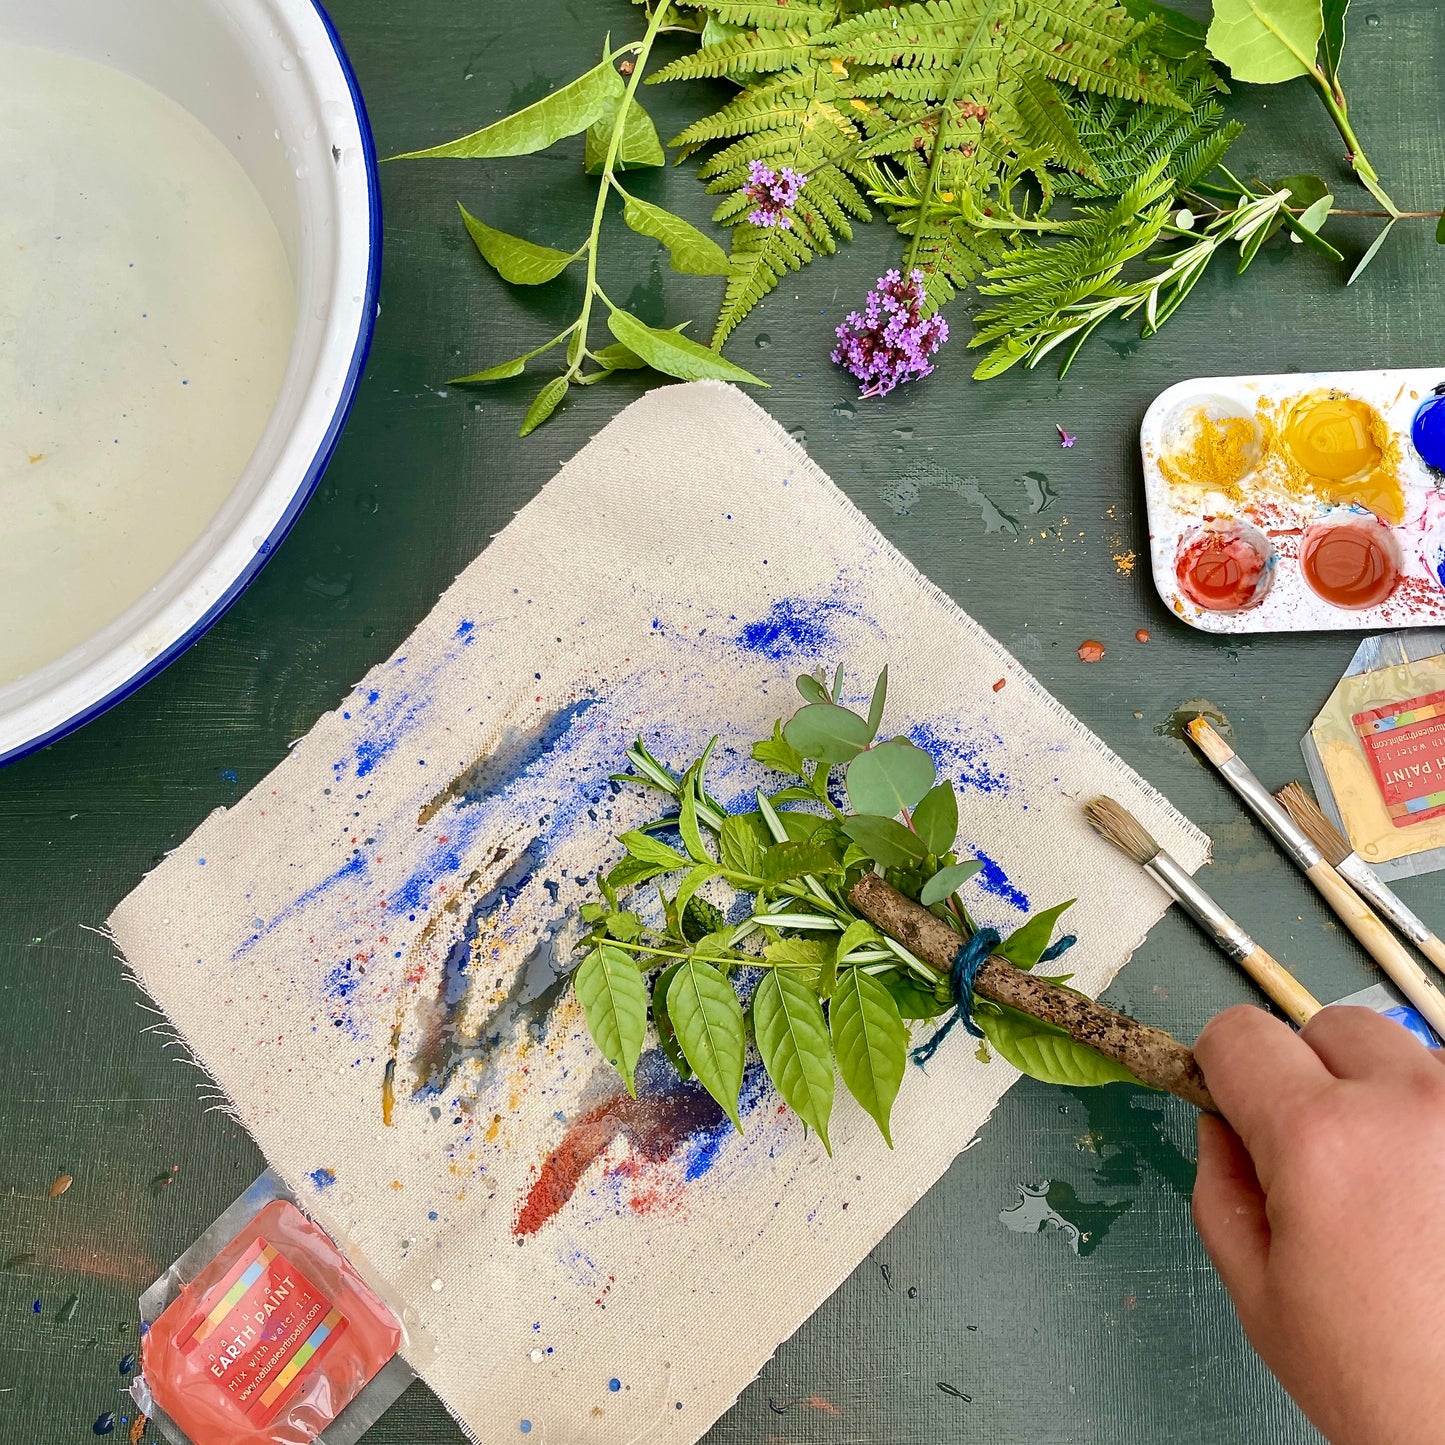 painting with a nature brush on canvas